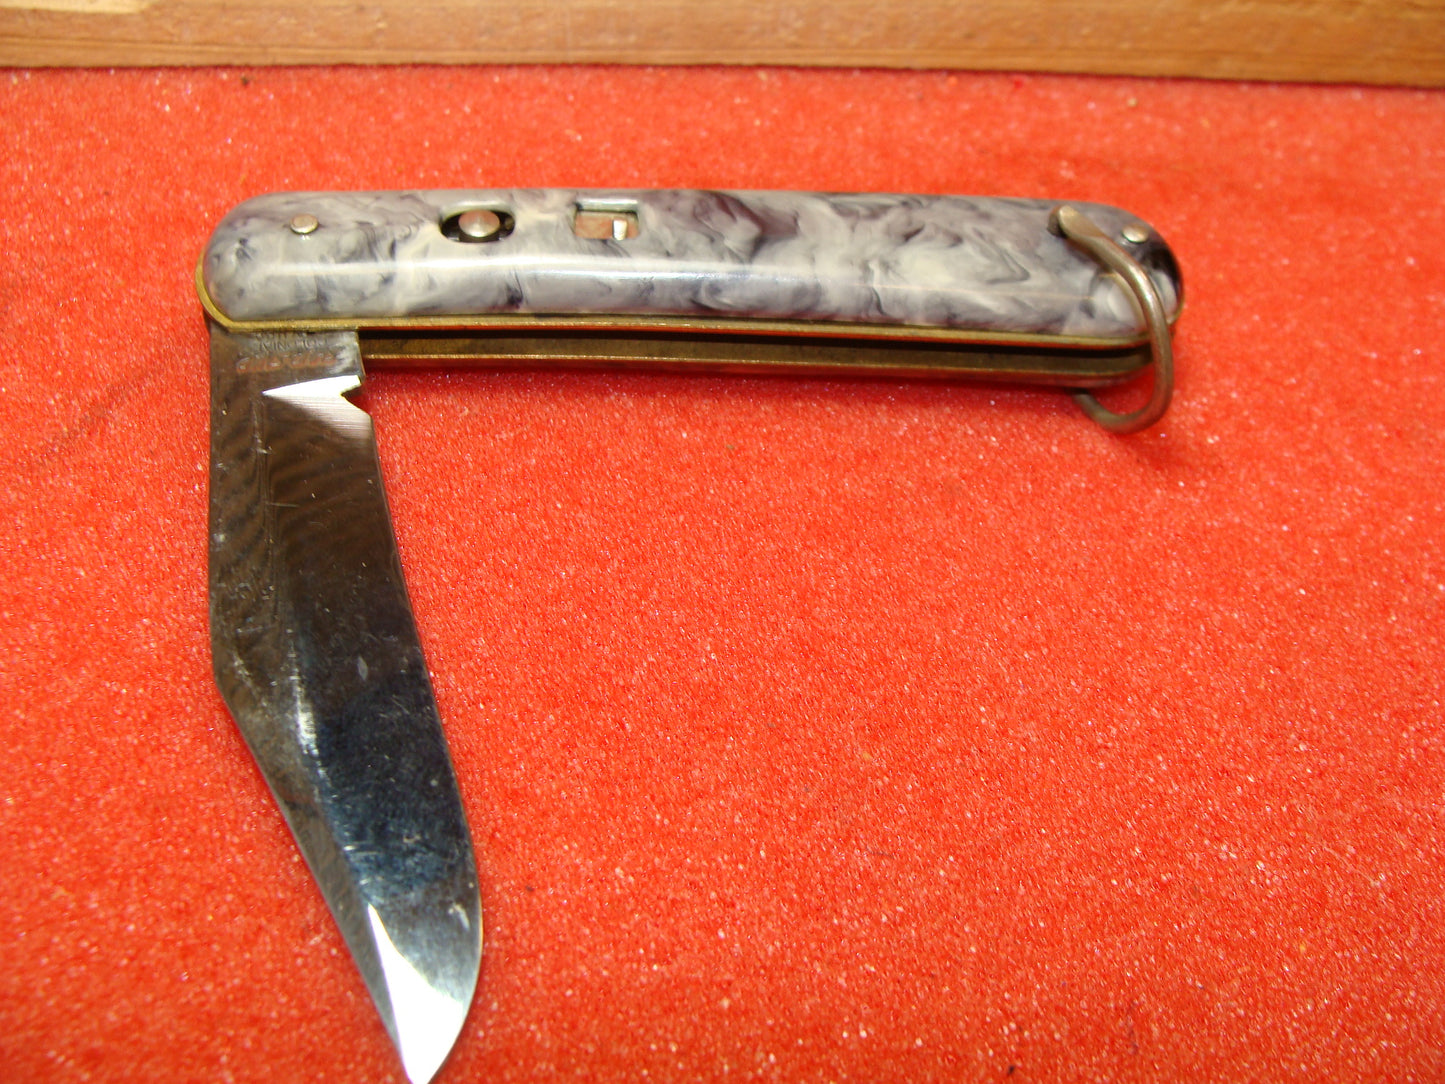 SHUR SNAP COLONIAL KNIFE CO. 1926-56 AMERICAN AUTOMATIC KNIFE 4 1/8" STUBBY JACK PARATROOPER GRAY SWIRL COMPOSITION HANDLES